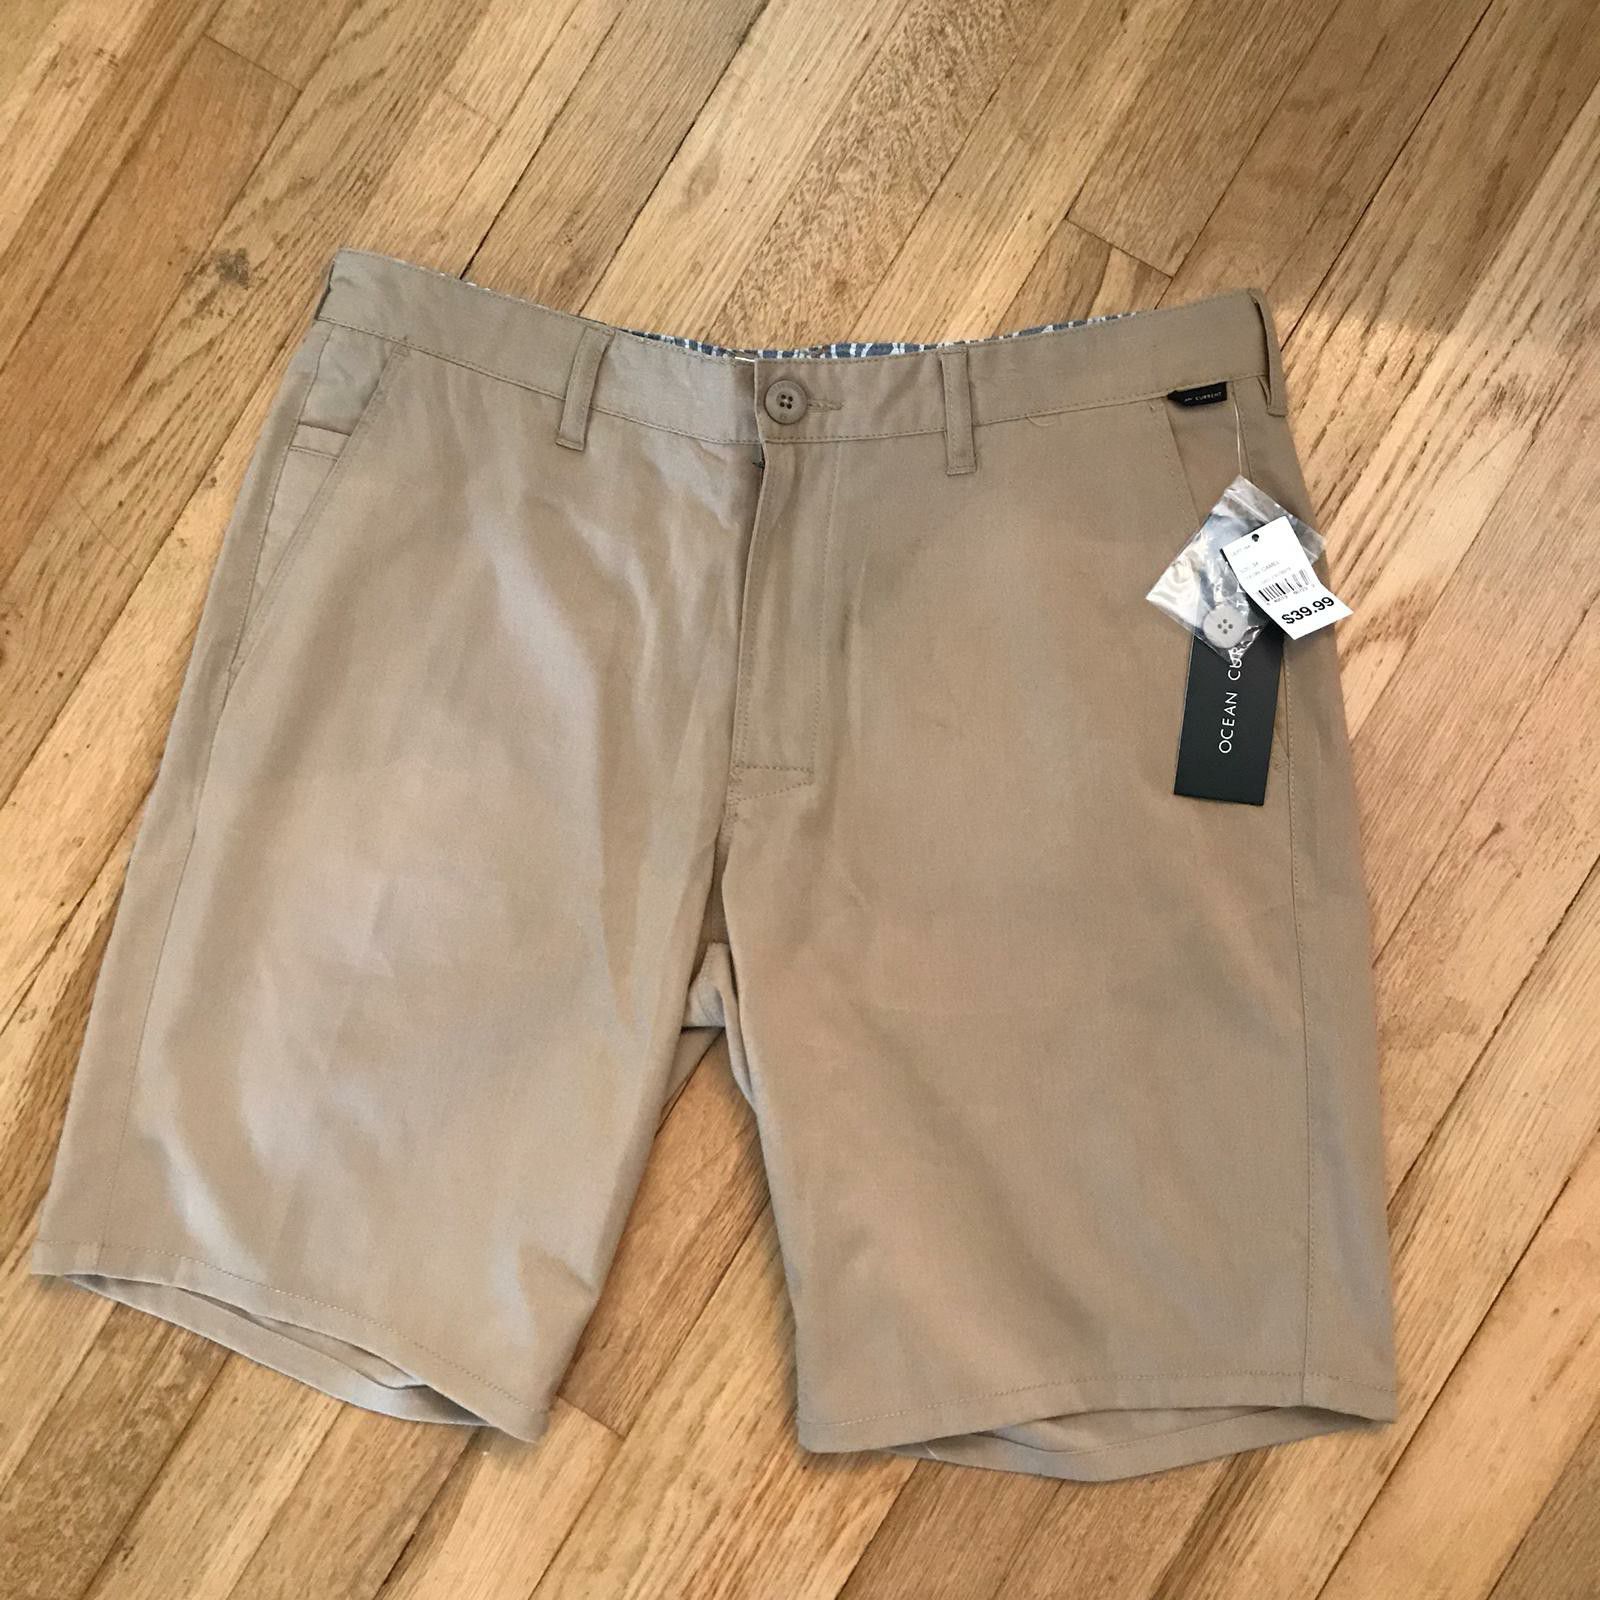 34* Ocean current Chino stretch short